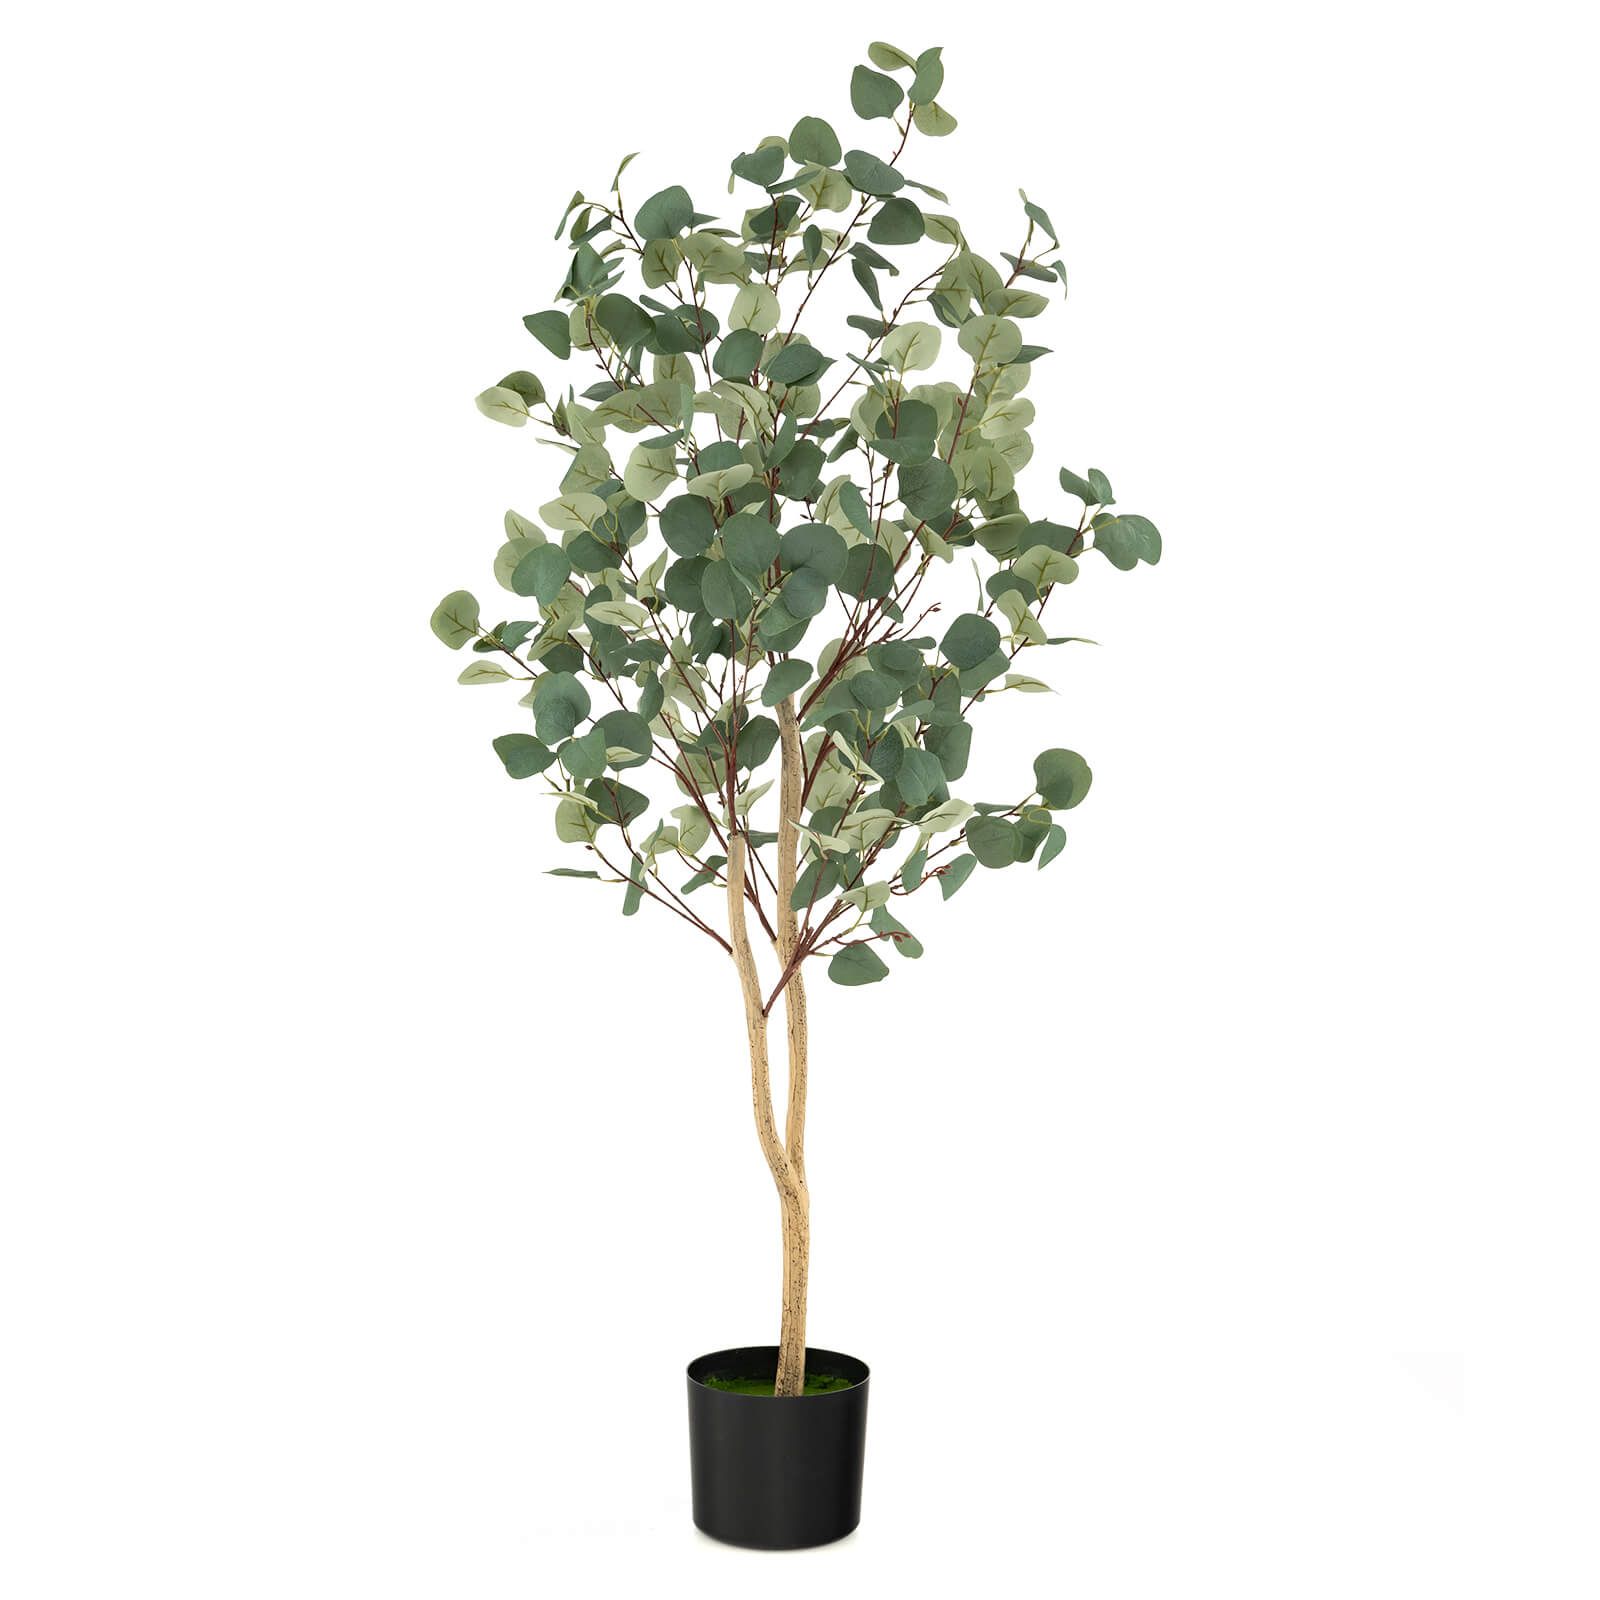 140cm Artificial Eucalyptus Tree with Adjustable Branches